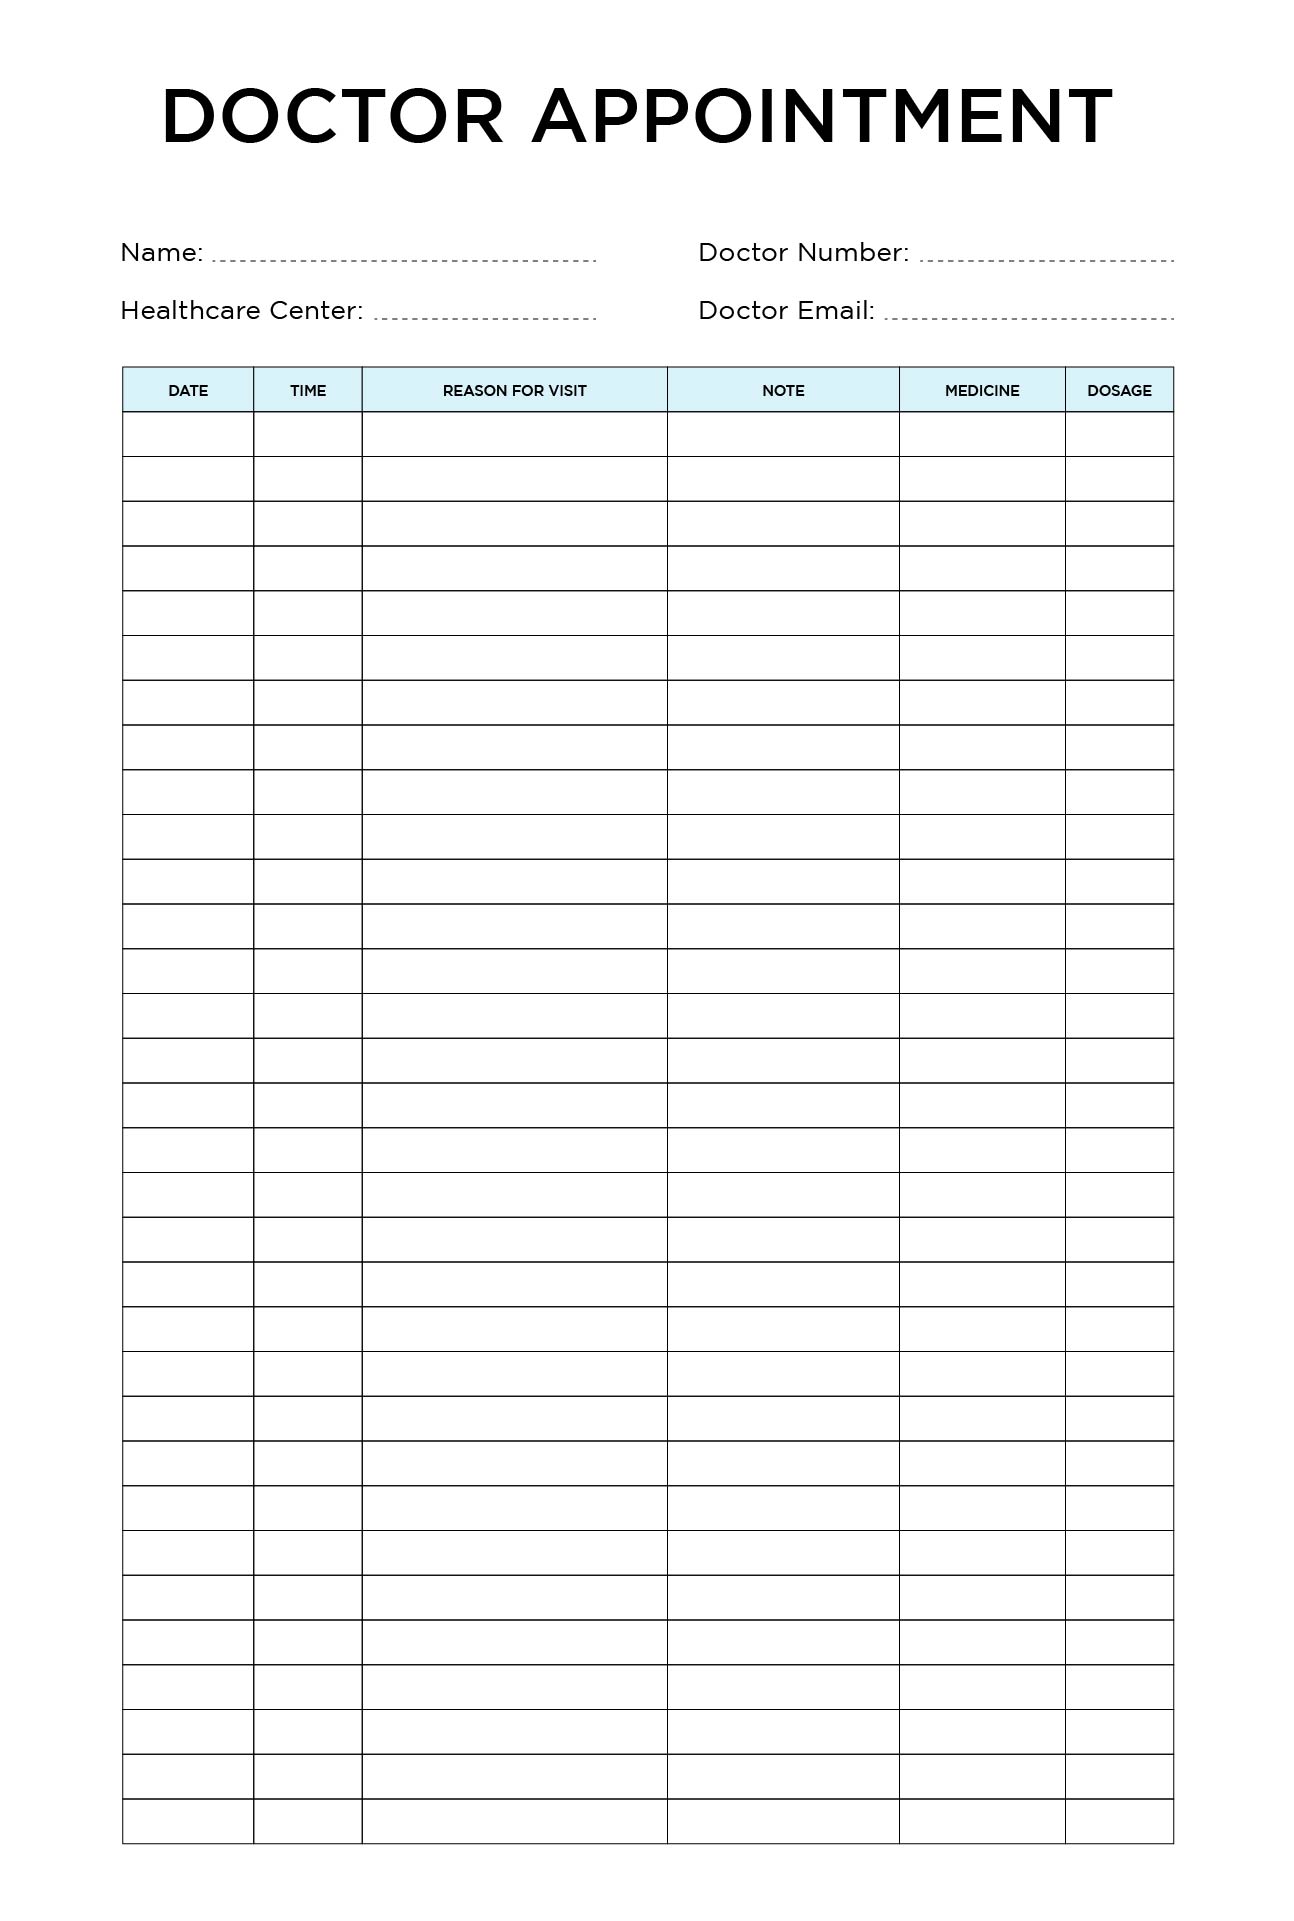 Doctor Appointments Printable